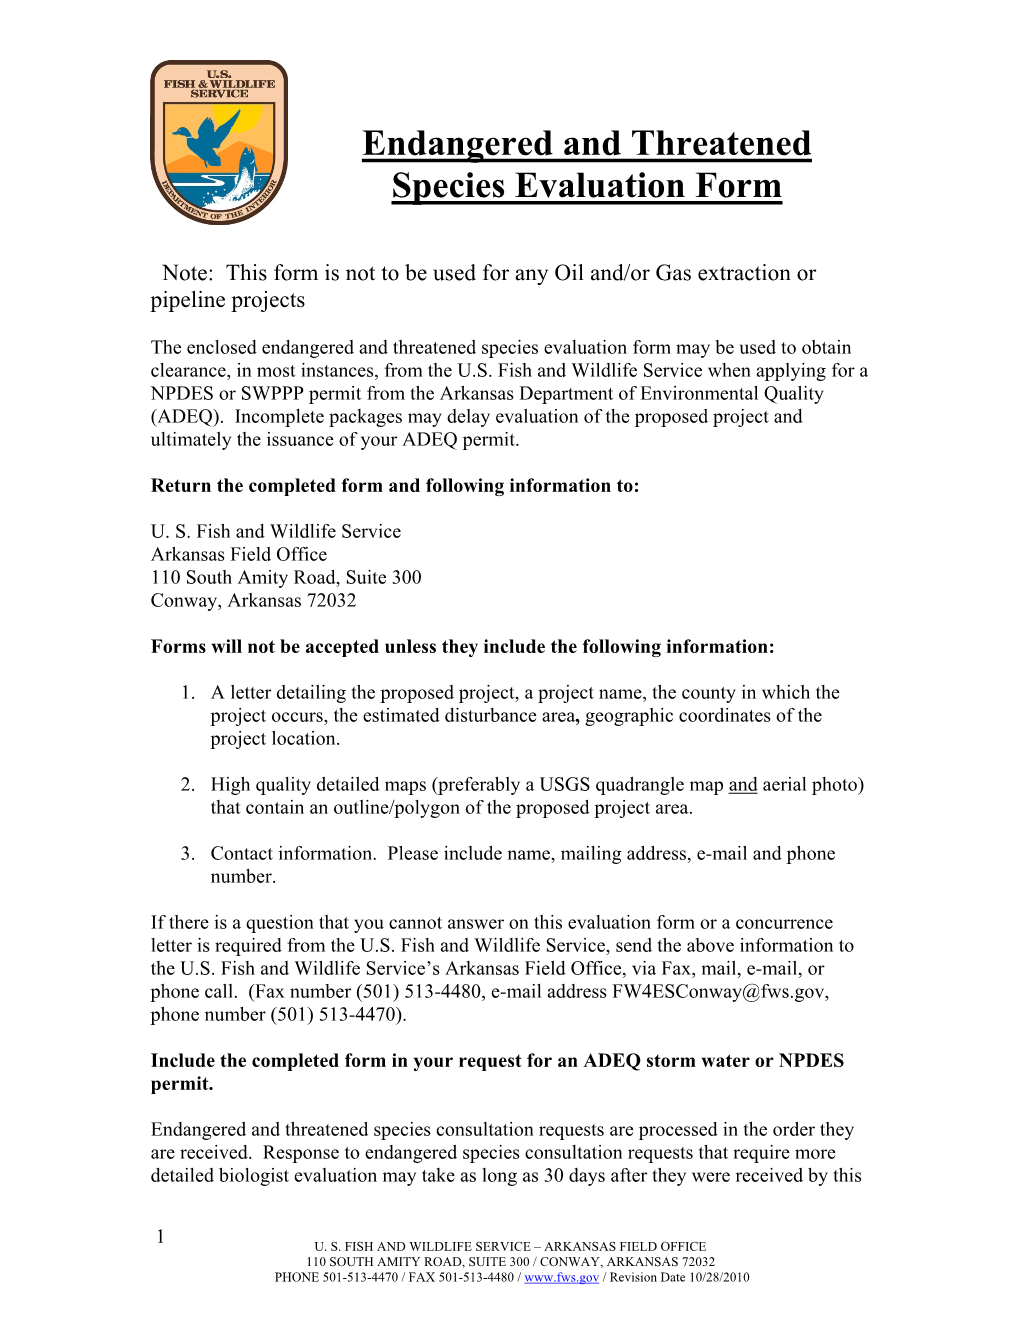 Endangered and Threatened Species Evaluation Form